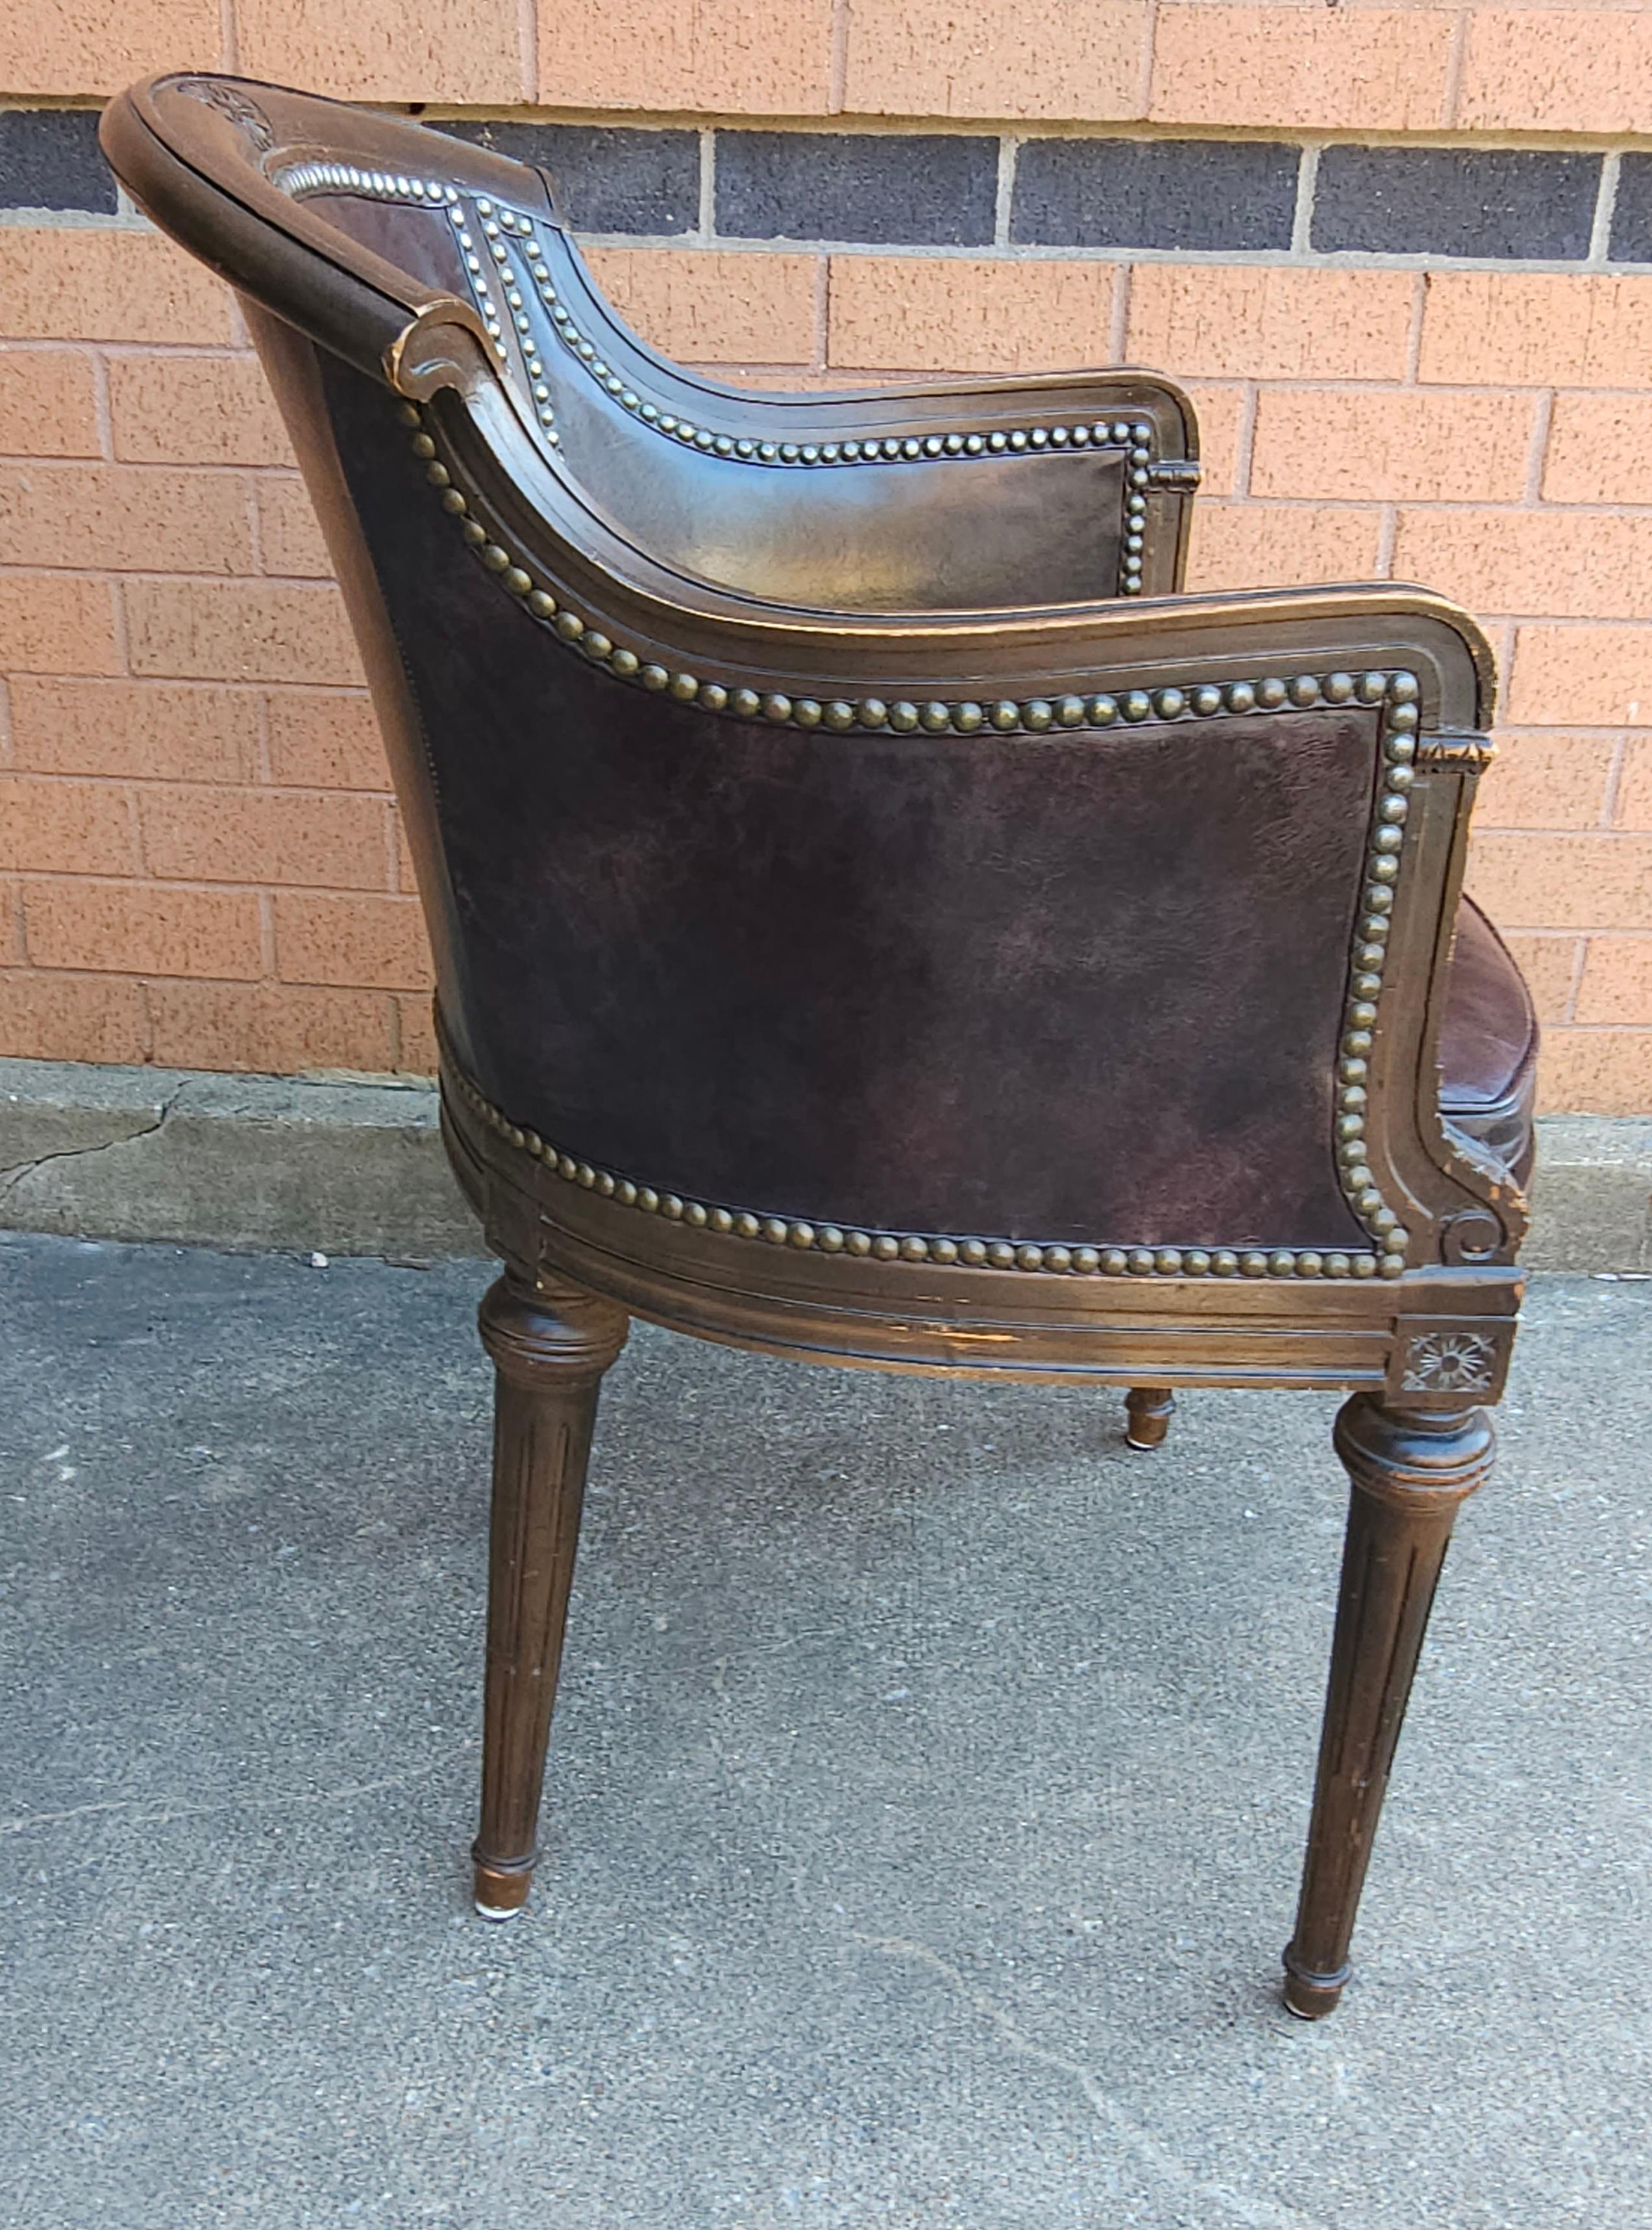 A Mid Century Empire Style full grain Leather Upholstered and Nailhead Studded Mahogany Arm Chair. Measures 22